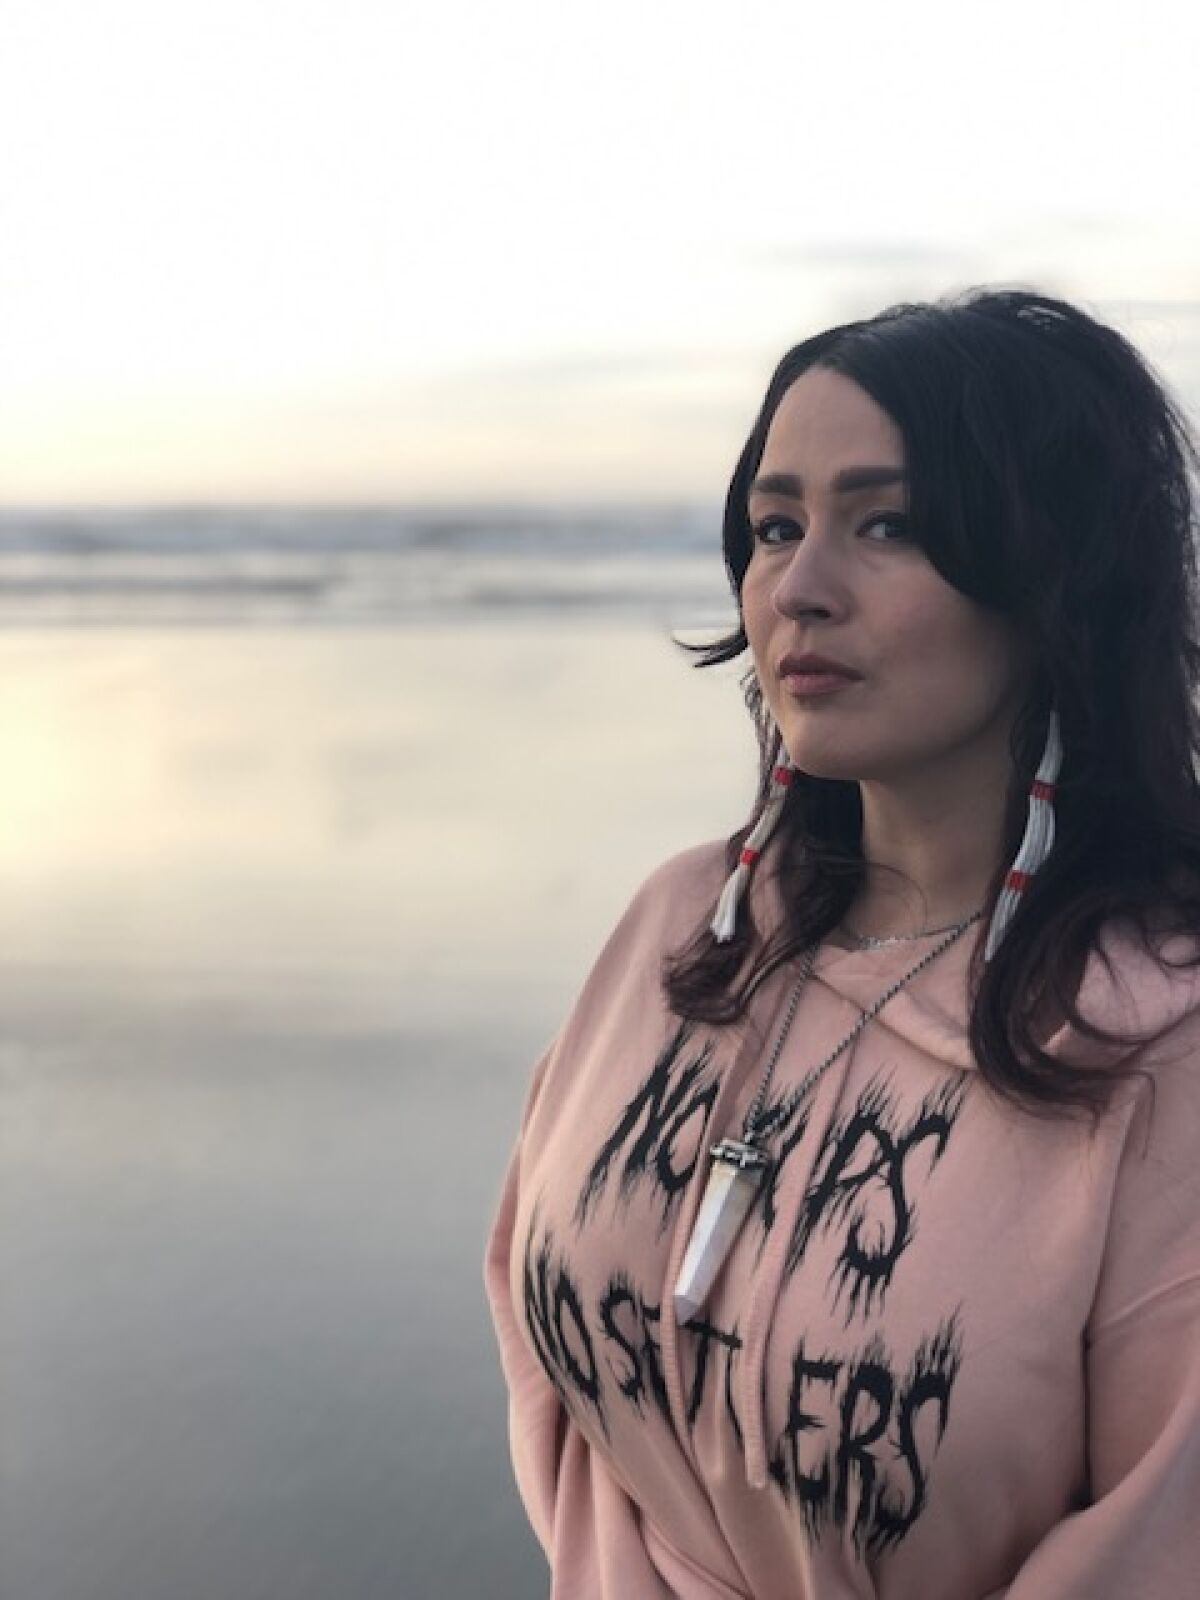 Sasha LaPointe’s memoir, “Red Paint,” entwines her personal history with that of her Coast Salish ancestors north of Seattle.